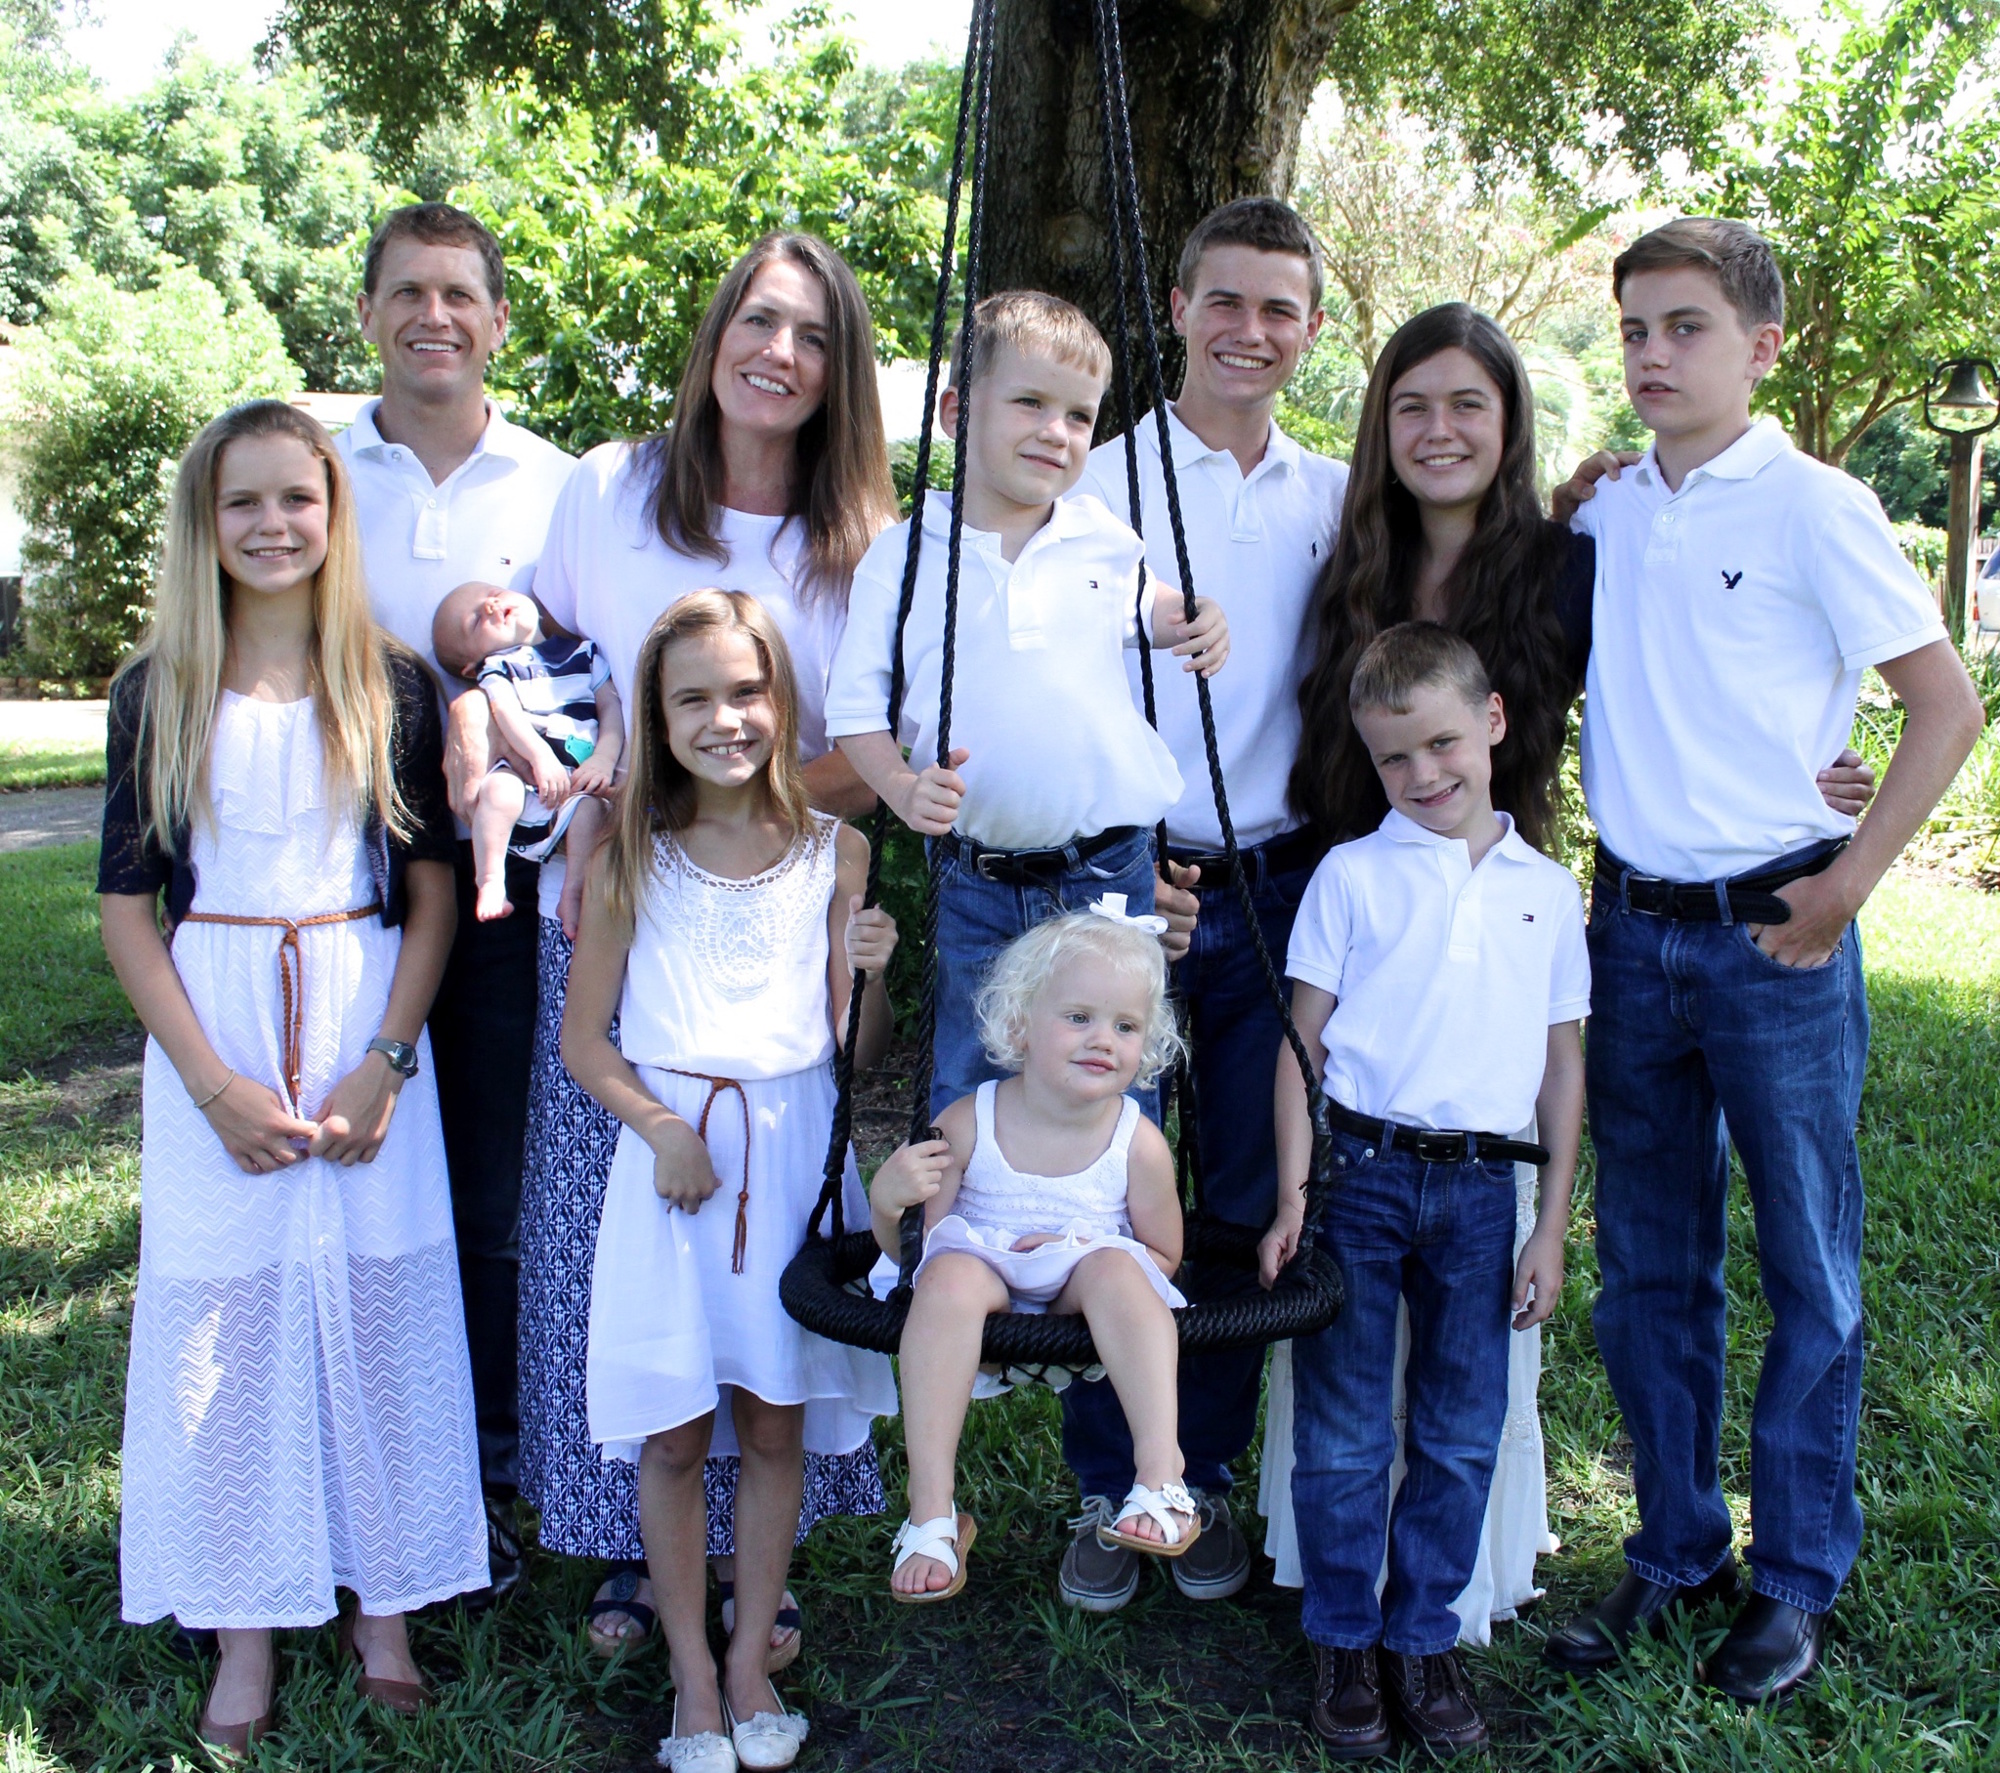 Dr. Gregory Gordon, his wife, Maggie, and their nine children, who range in age from 10 months to 19 years.